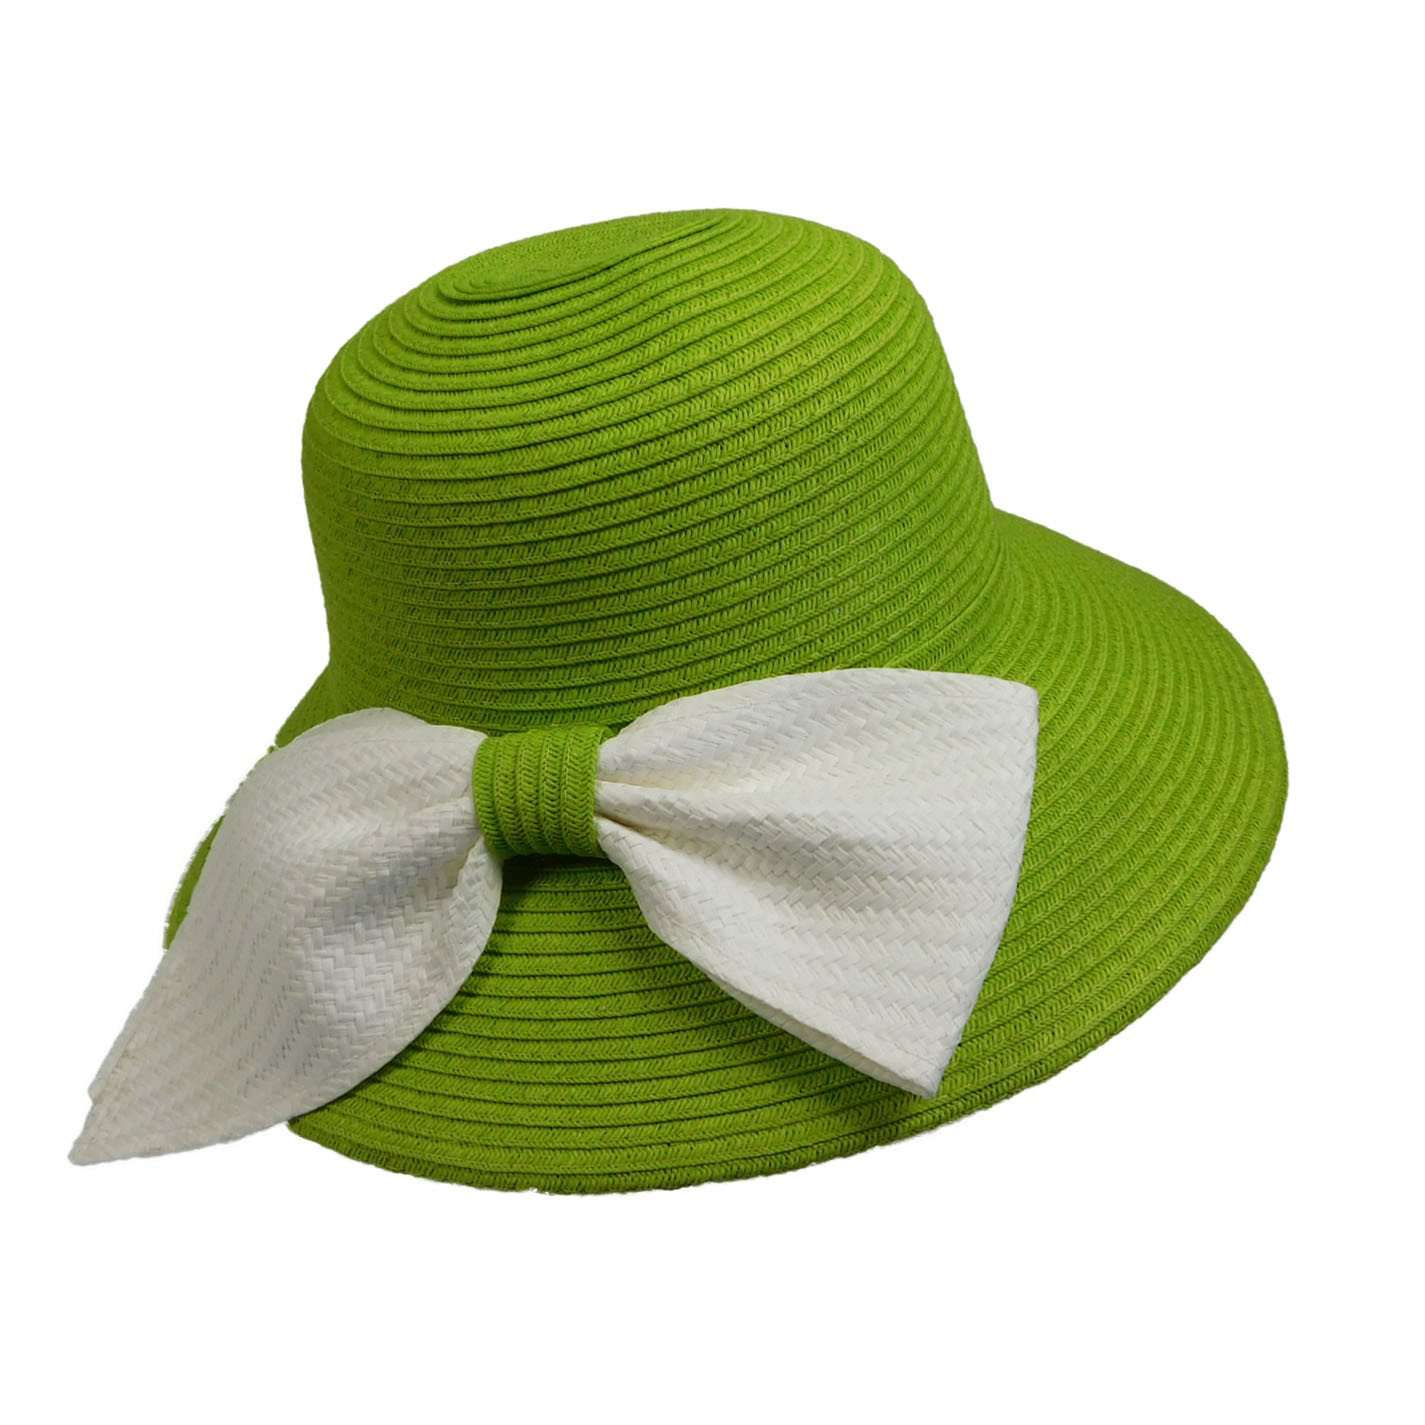 Big Brim Sun Hat with White Bow Wide Brim Hat Something Special Hat WSPS696LM Lime  